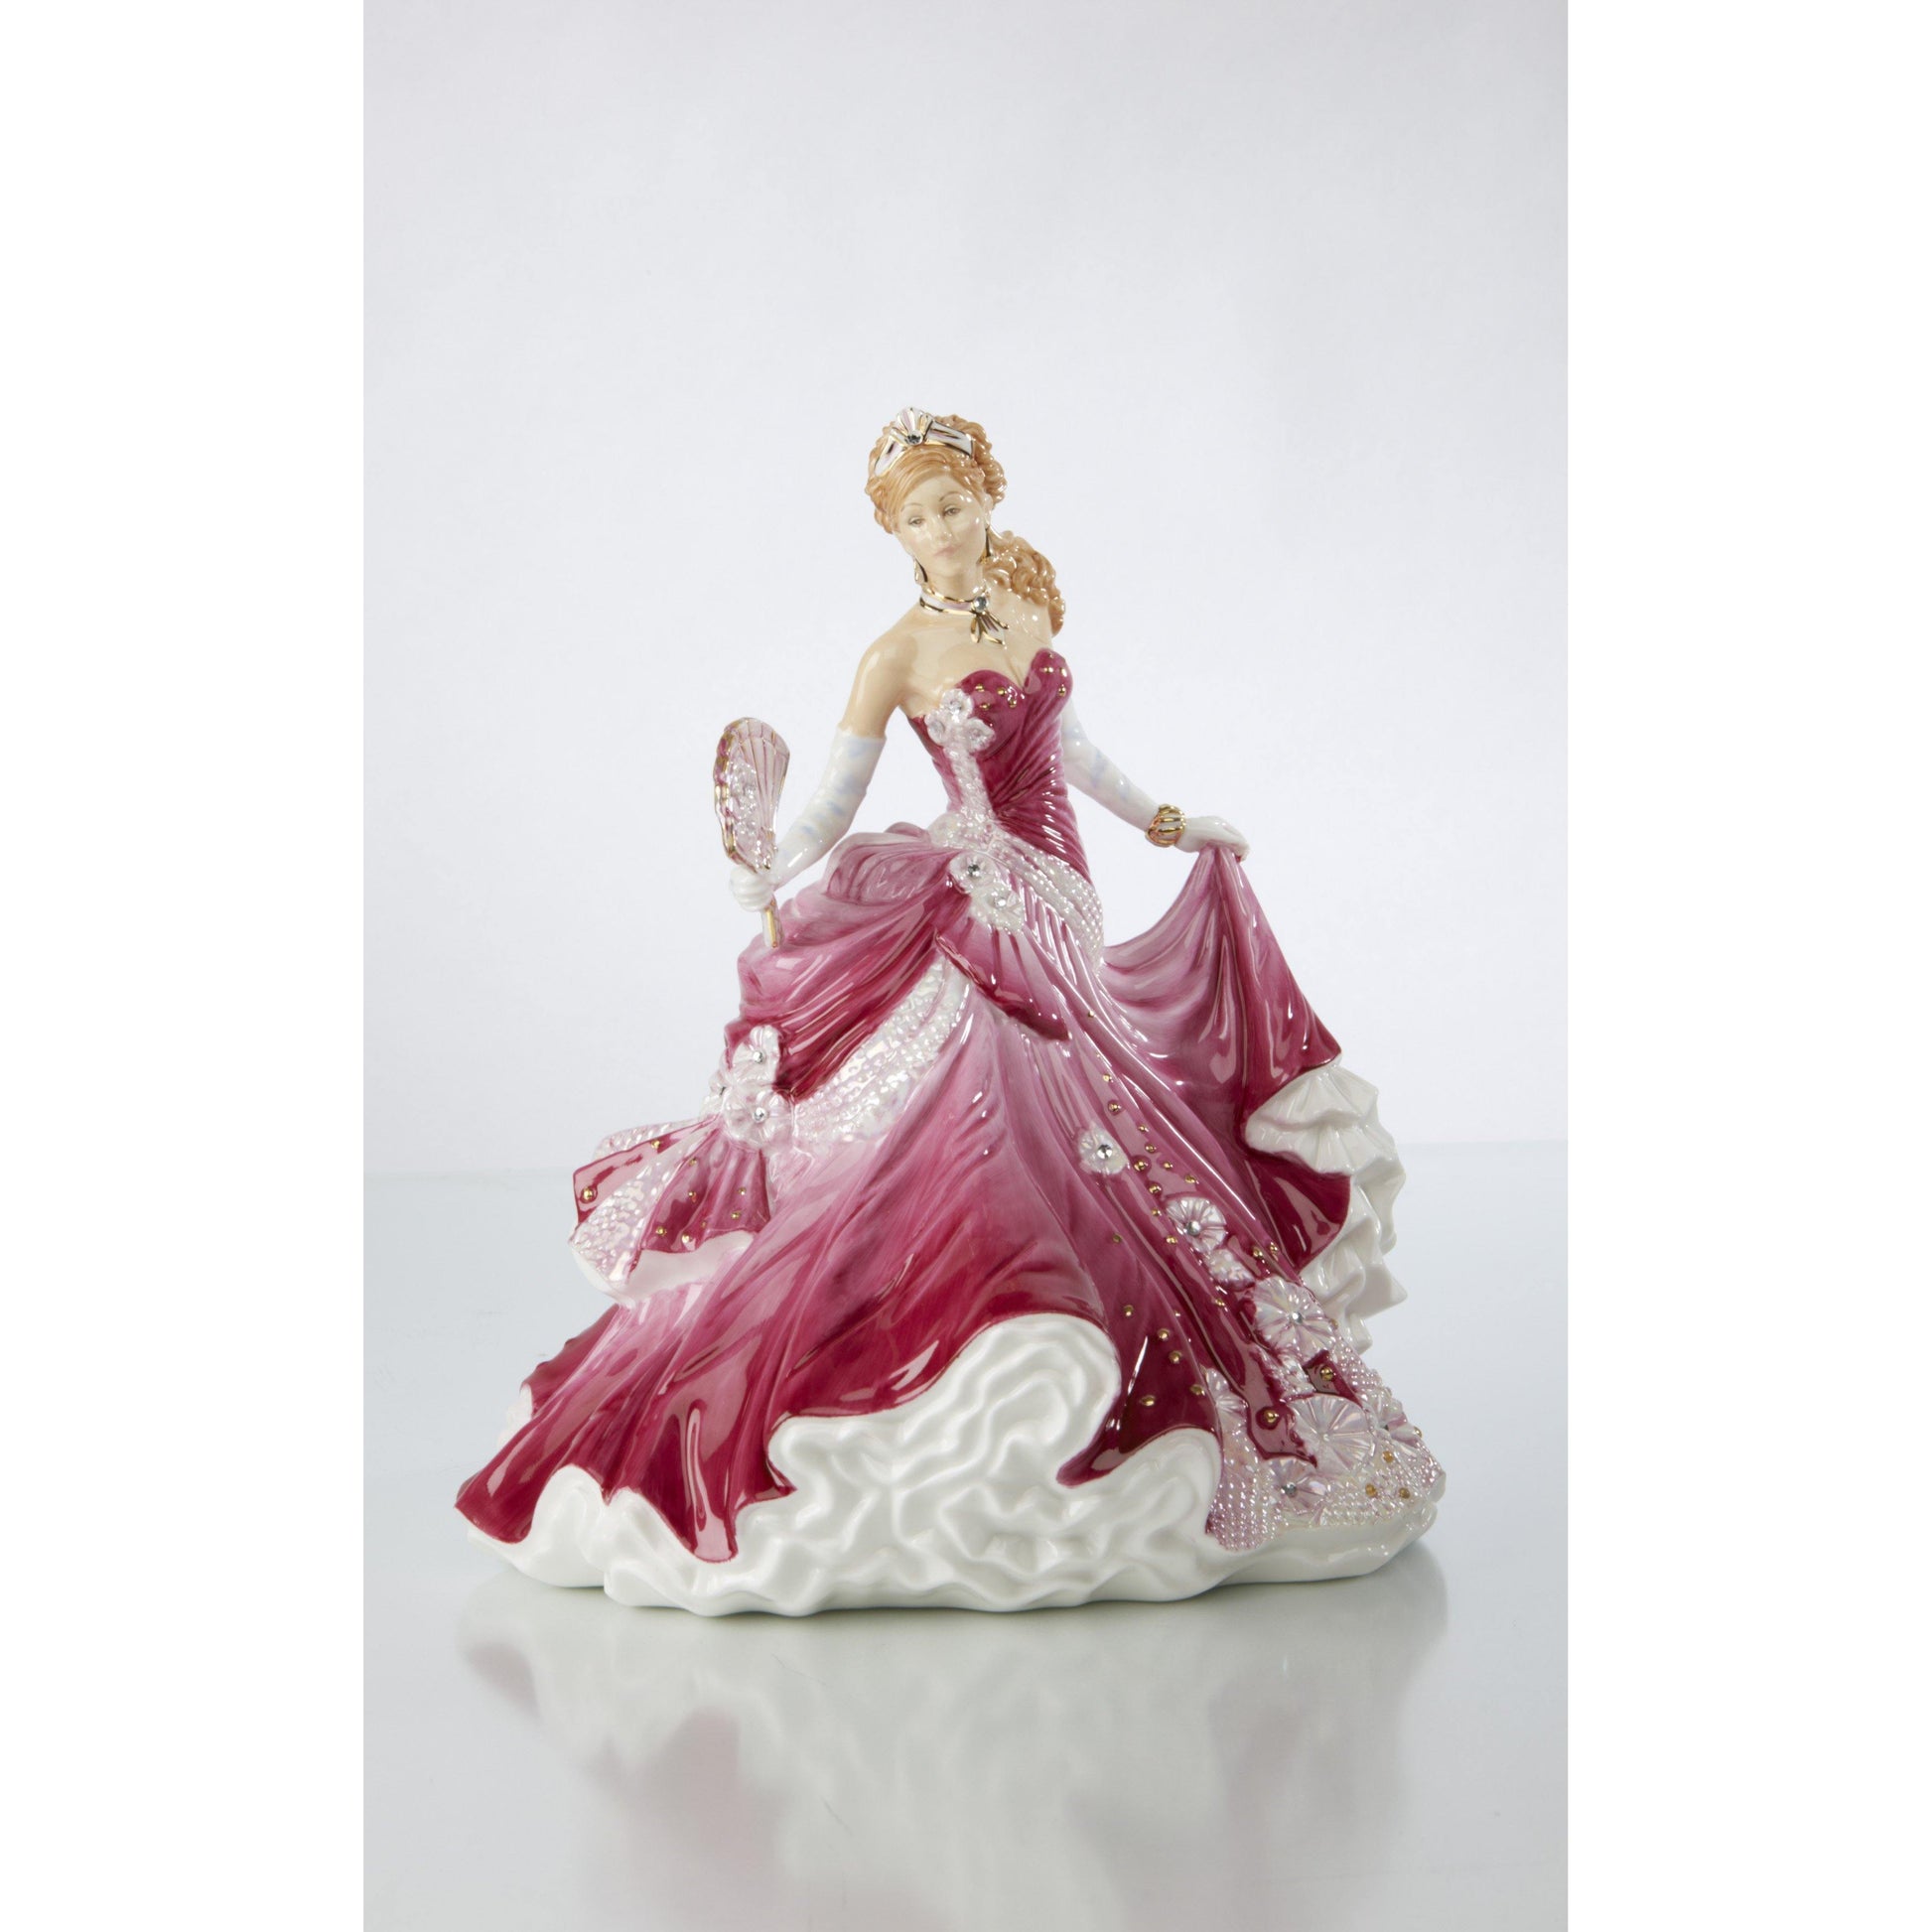 Sweet Romance (English Ladies Co) - Gallery Gifts Online 